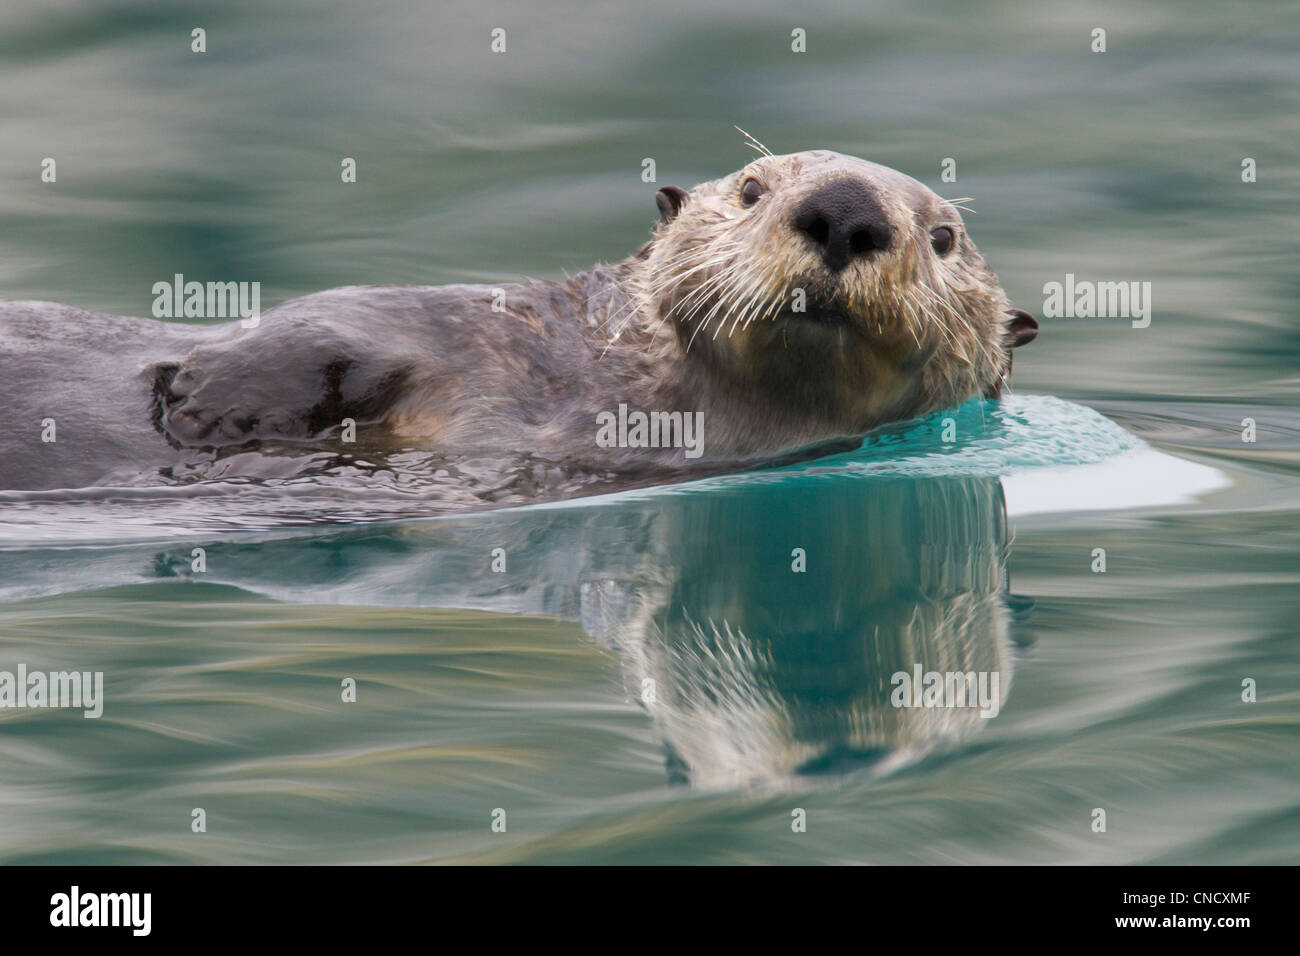 Sea otter swimming in glassy calm green water with reflection, Prince William Sound, Southcentral Alaska, Winter Stock Photo